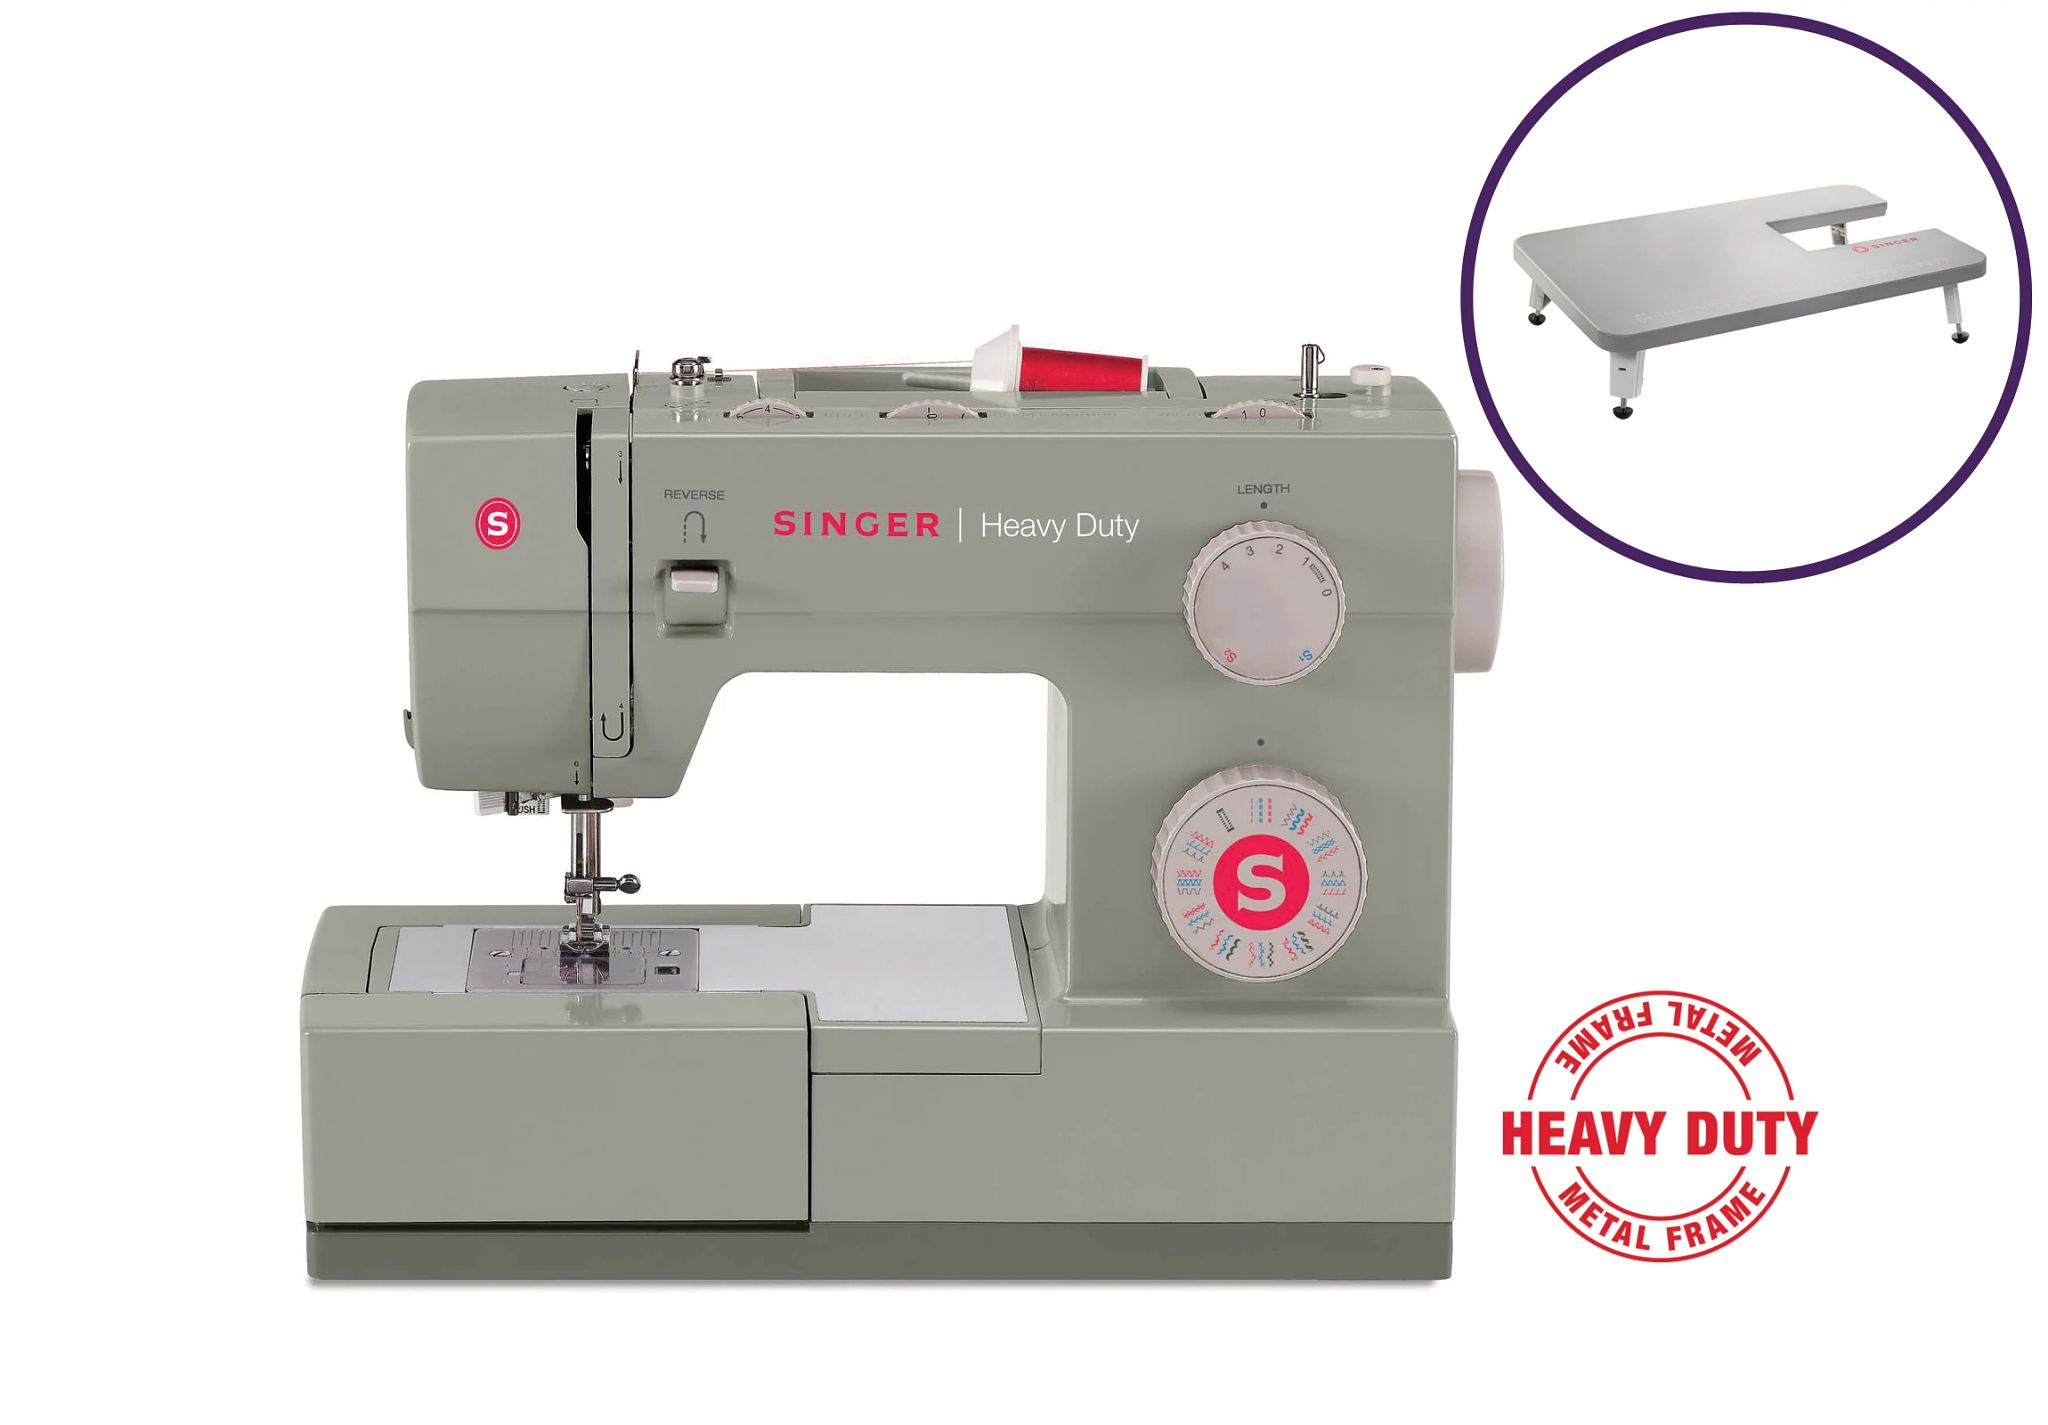 Singer 4411 Heavy Duty Sewing Machine and Accessories - Unboxing